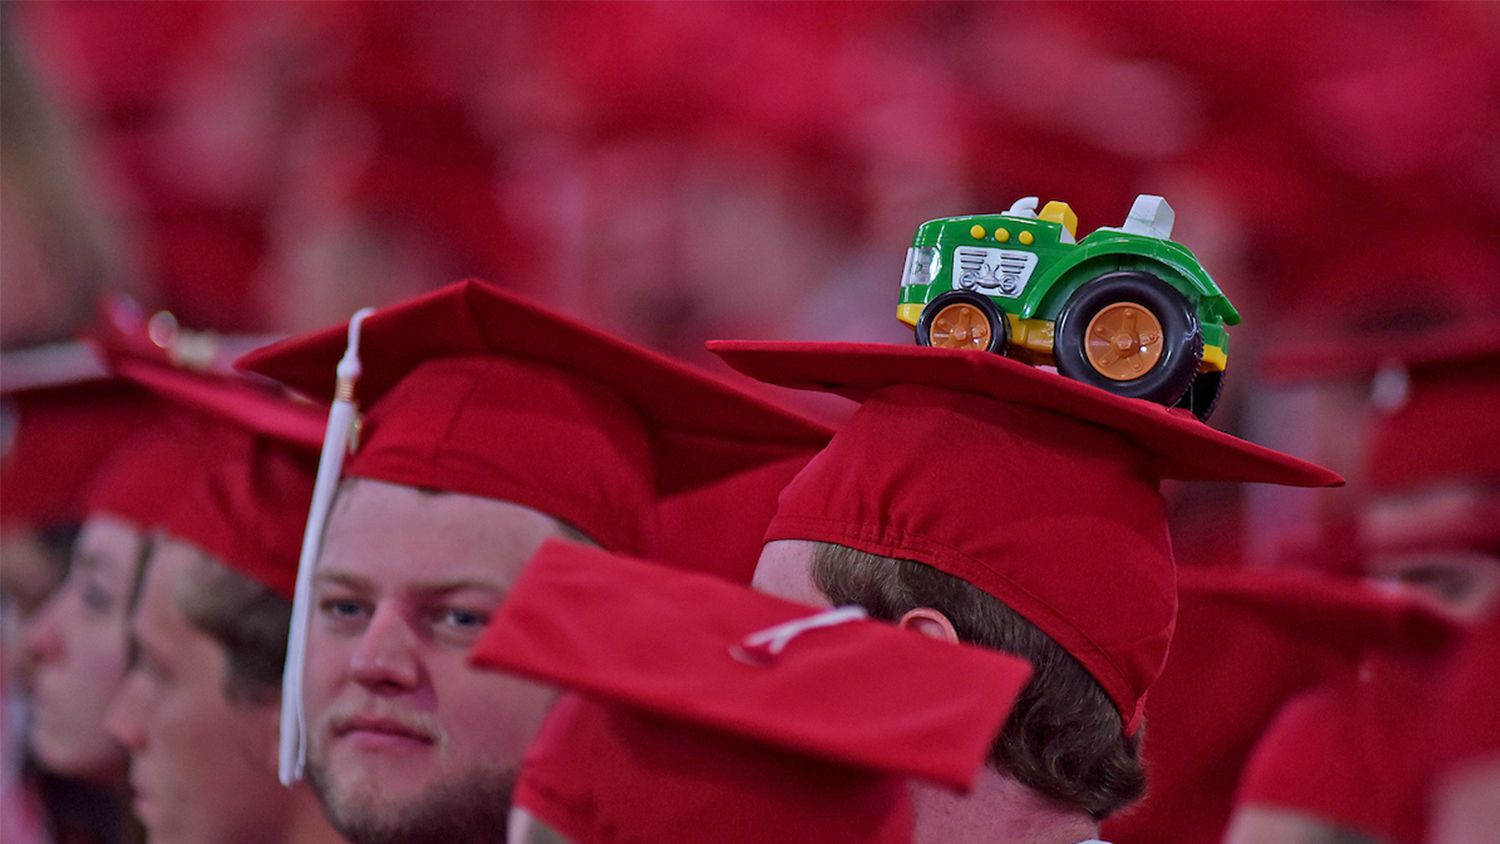 red graduation caps with a tractor on top of one cap